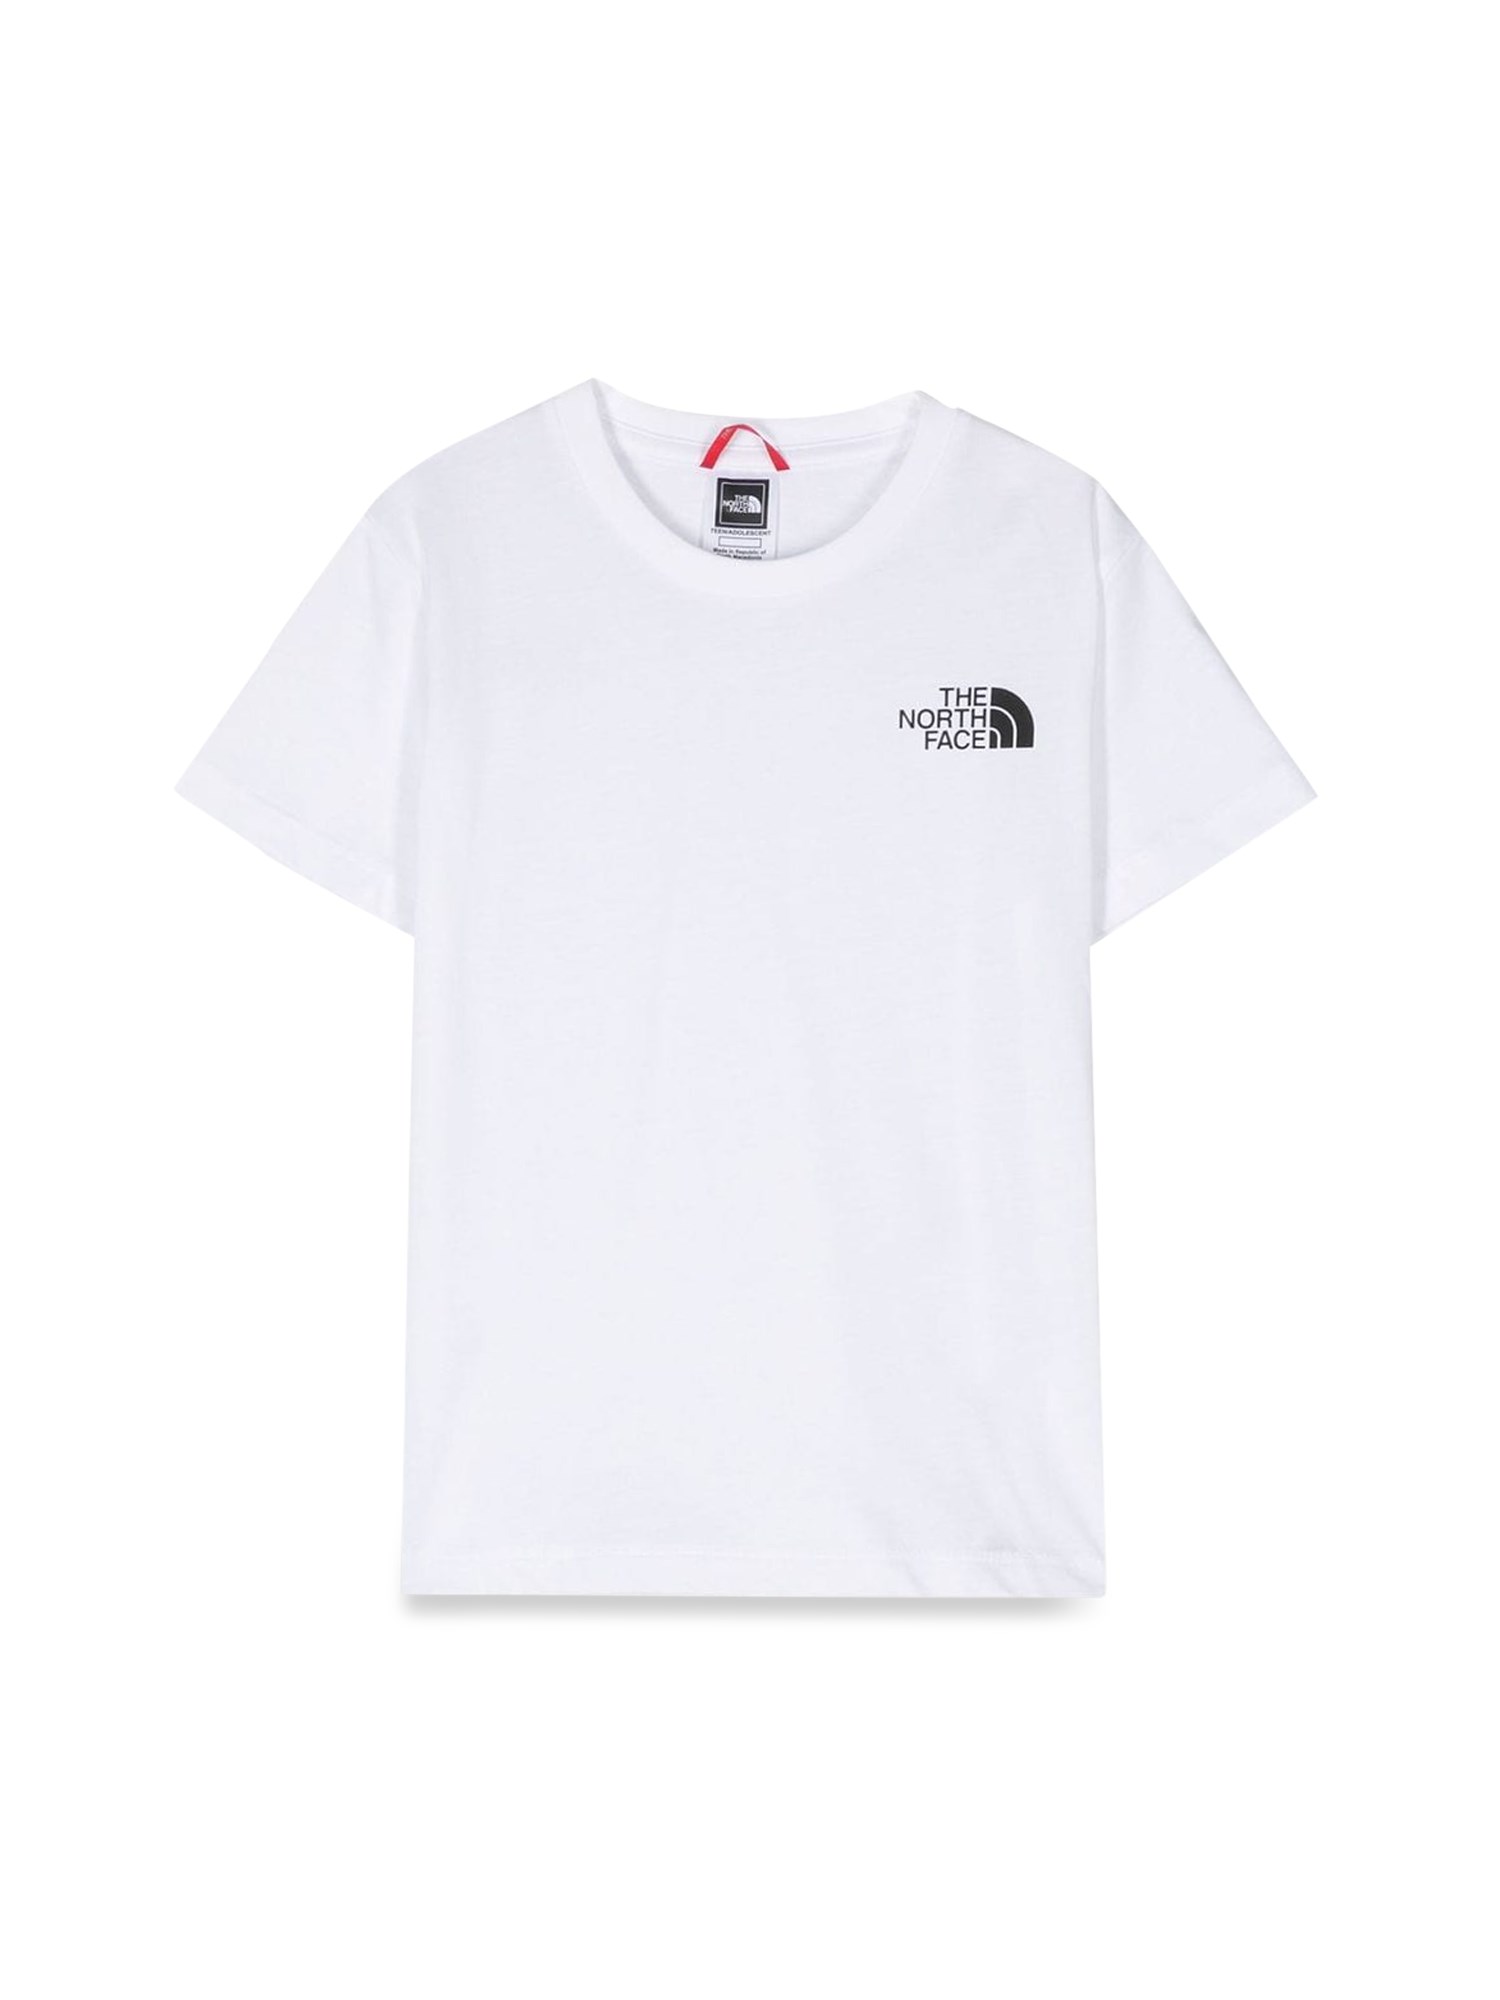 The North Face the north face simple dome tee